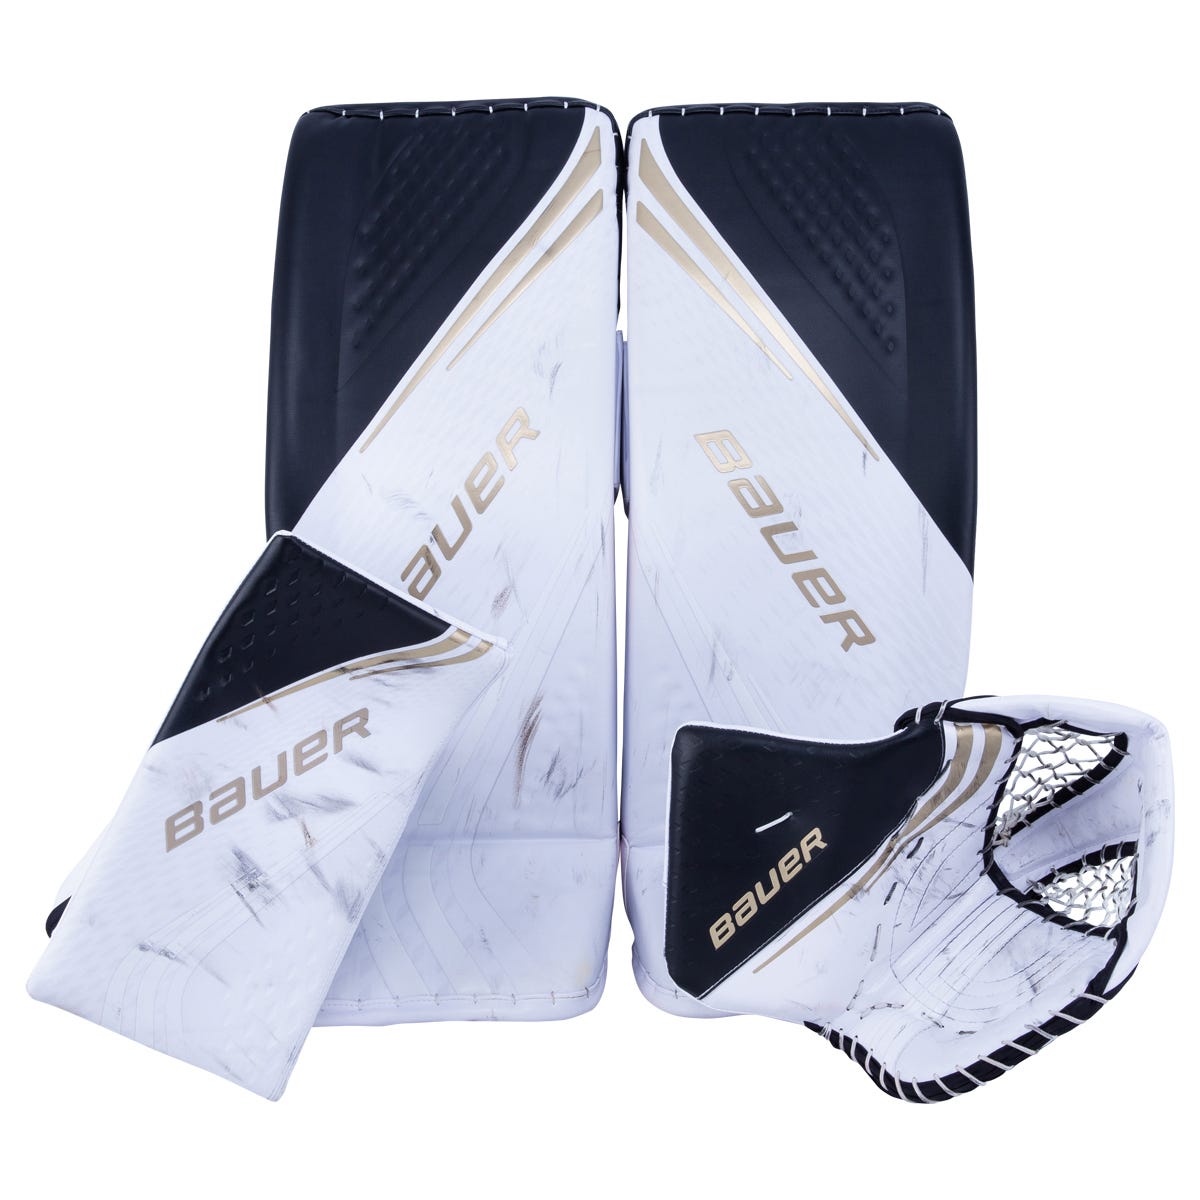 The Best Custom Goalie Pad Designs + Graphics of All Time